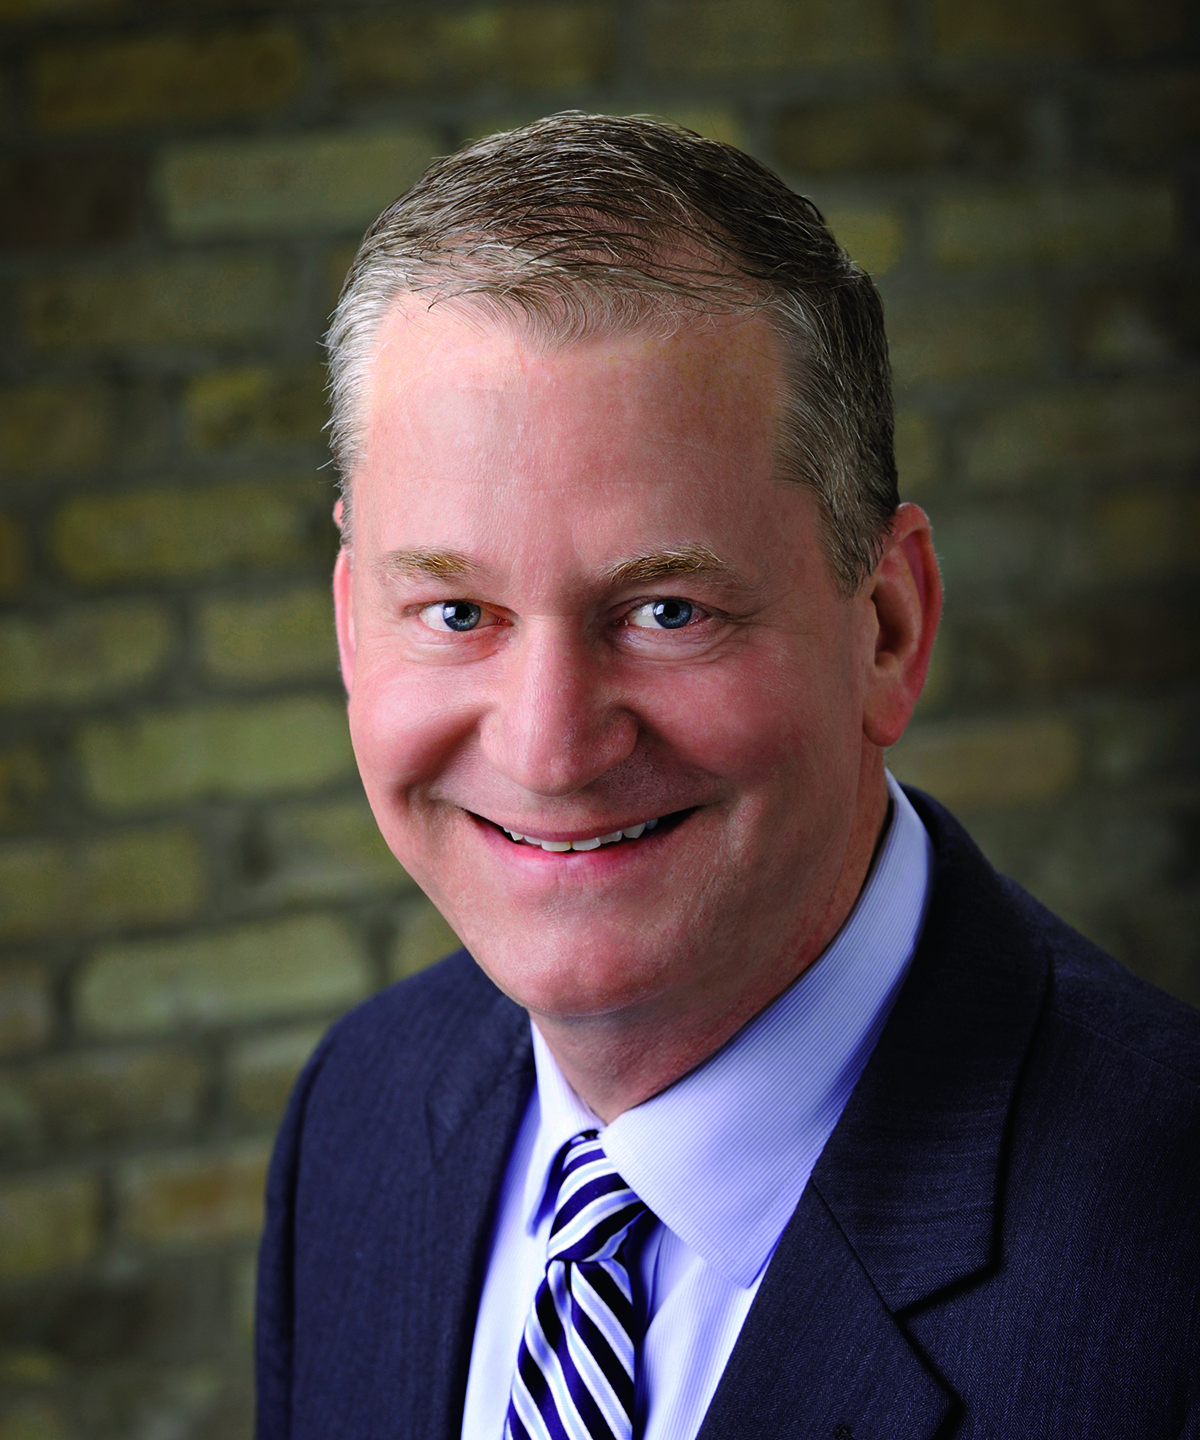 Paul Buege is president and chief operating officer of Pewaukee, Wis.-based Inlanta Mortgage